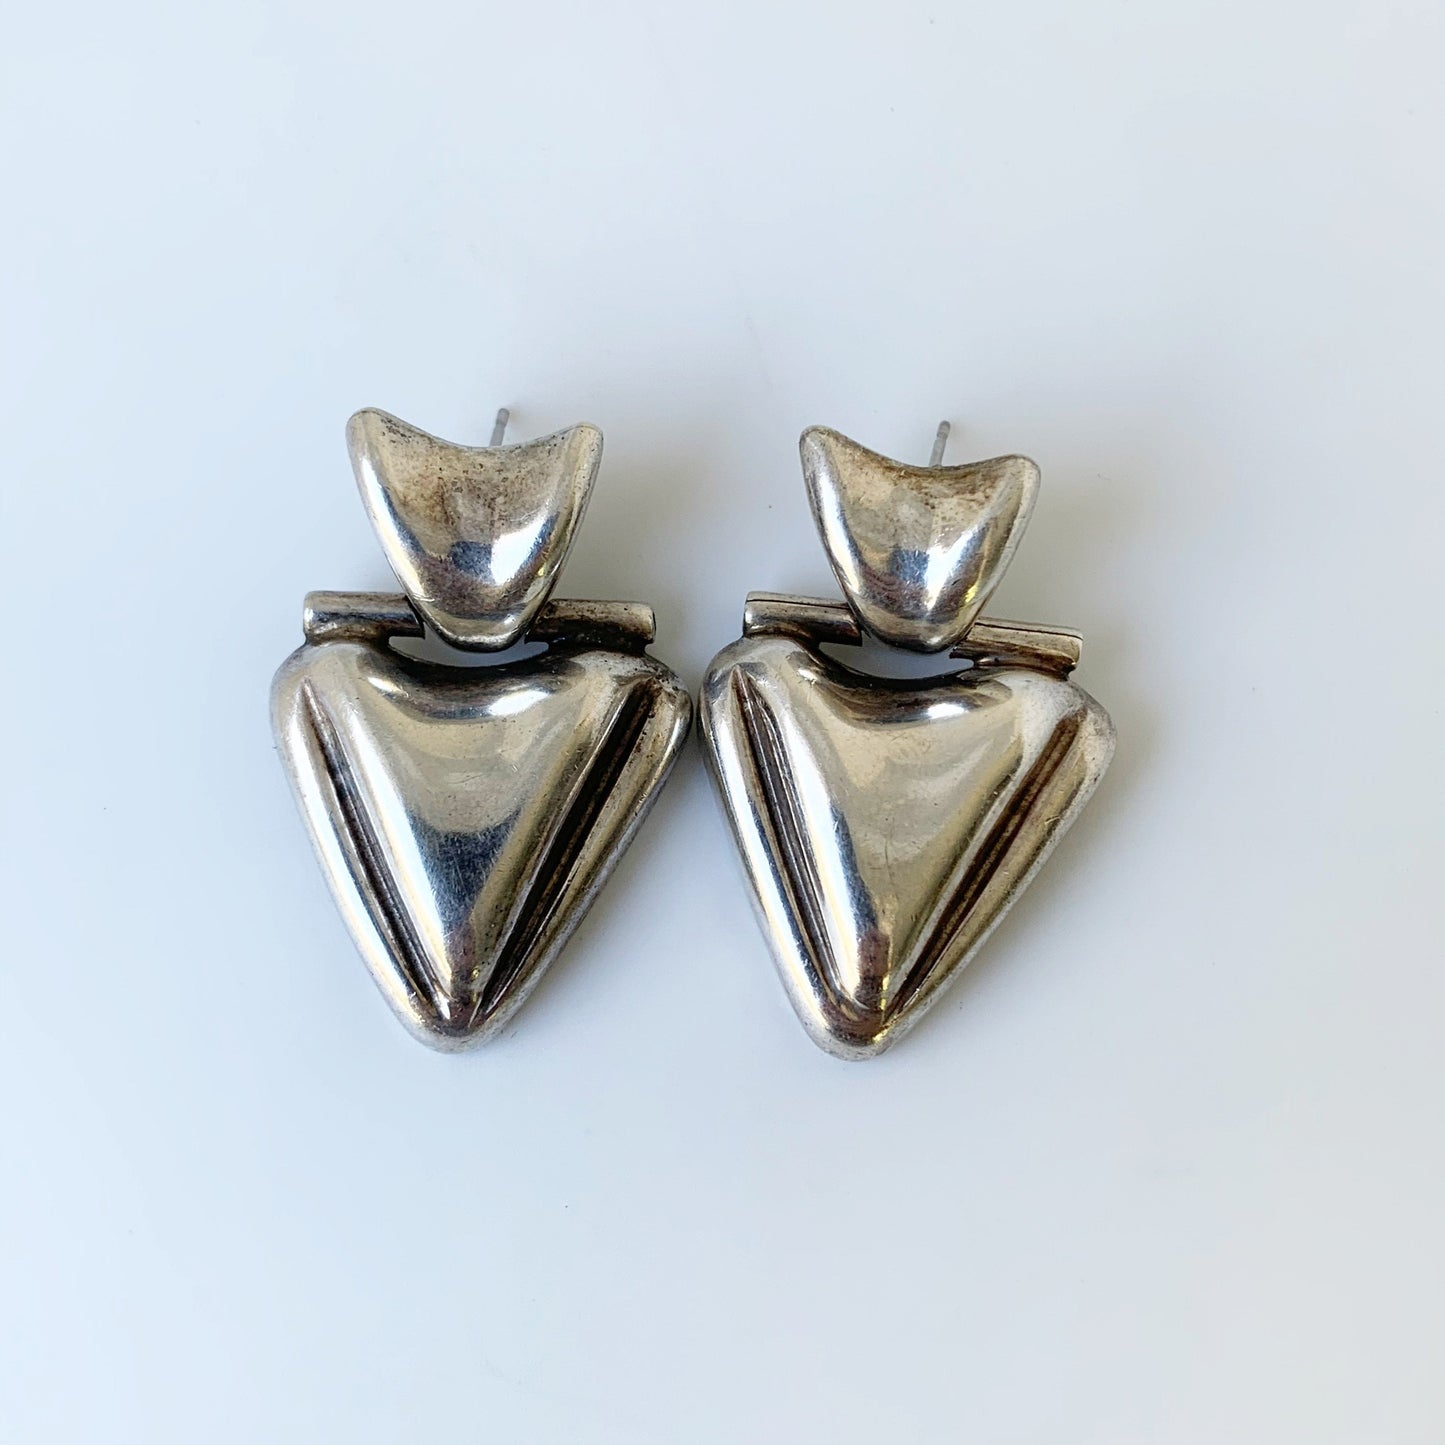 Vintage Mexican Silver Modernist Earrings | Modernist Hinged Dangle Earrings | Large Silver Earrings